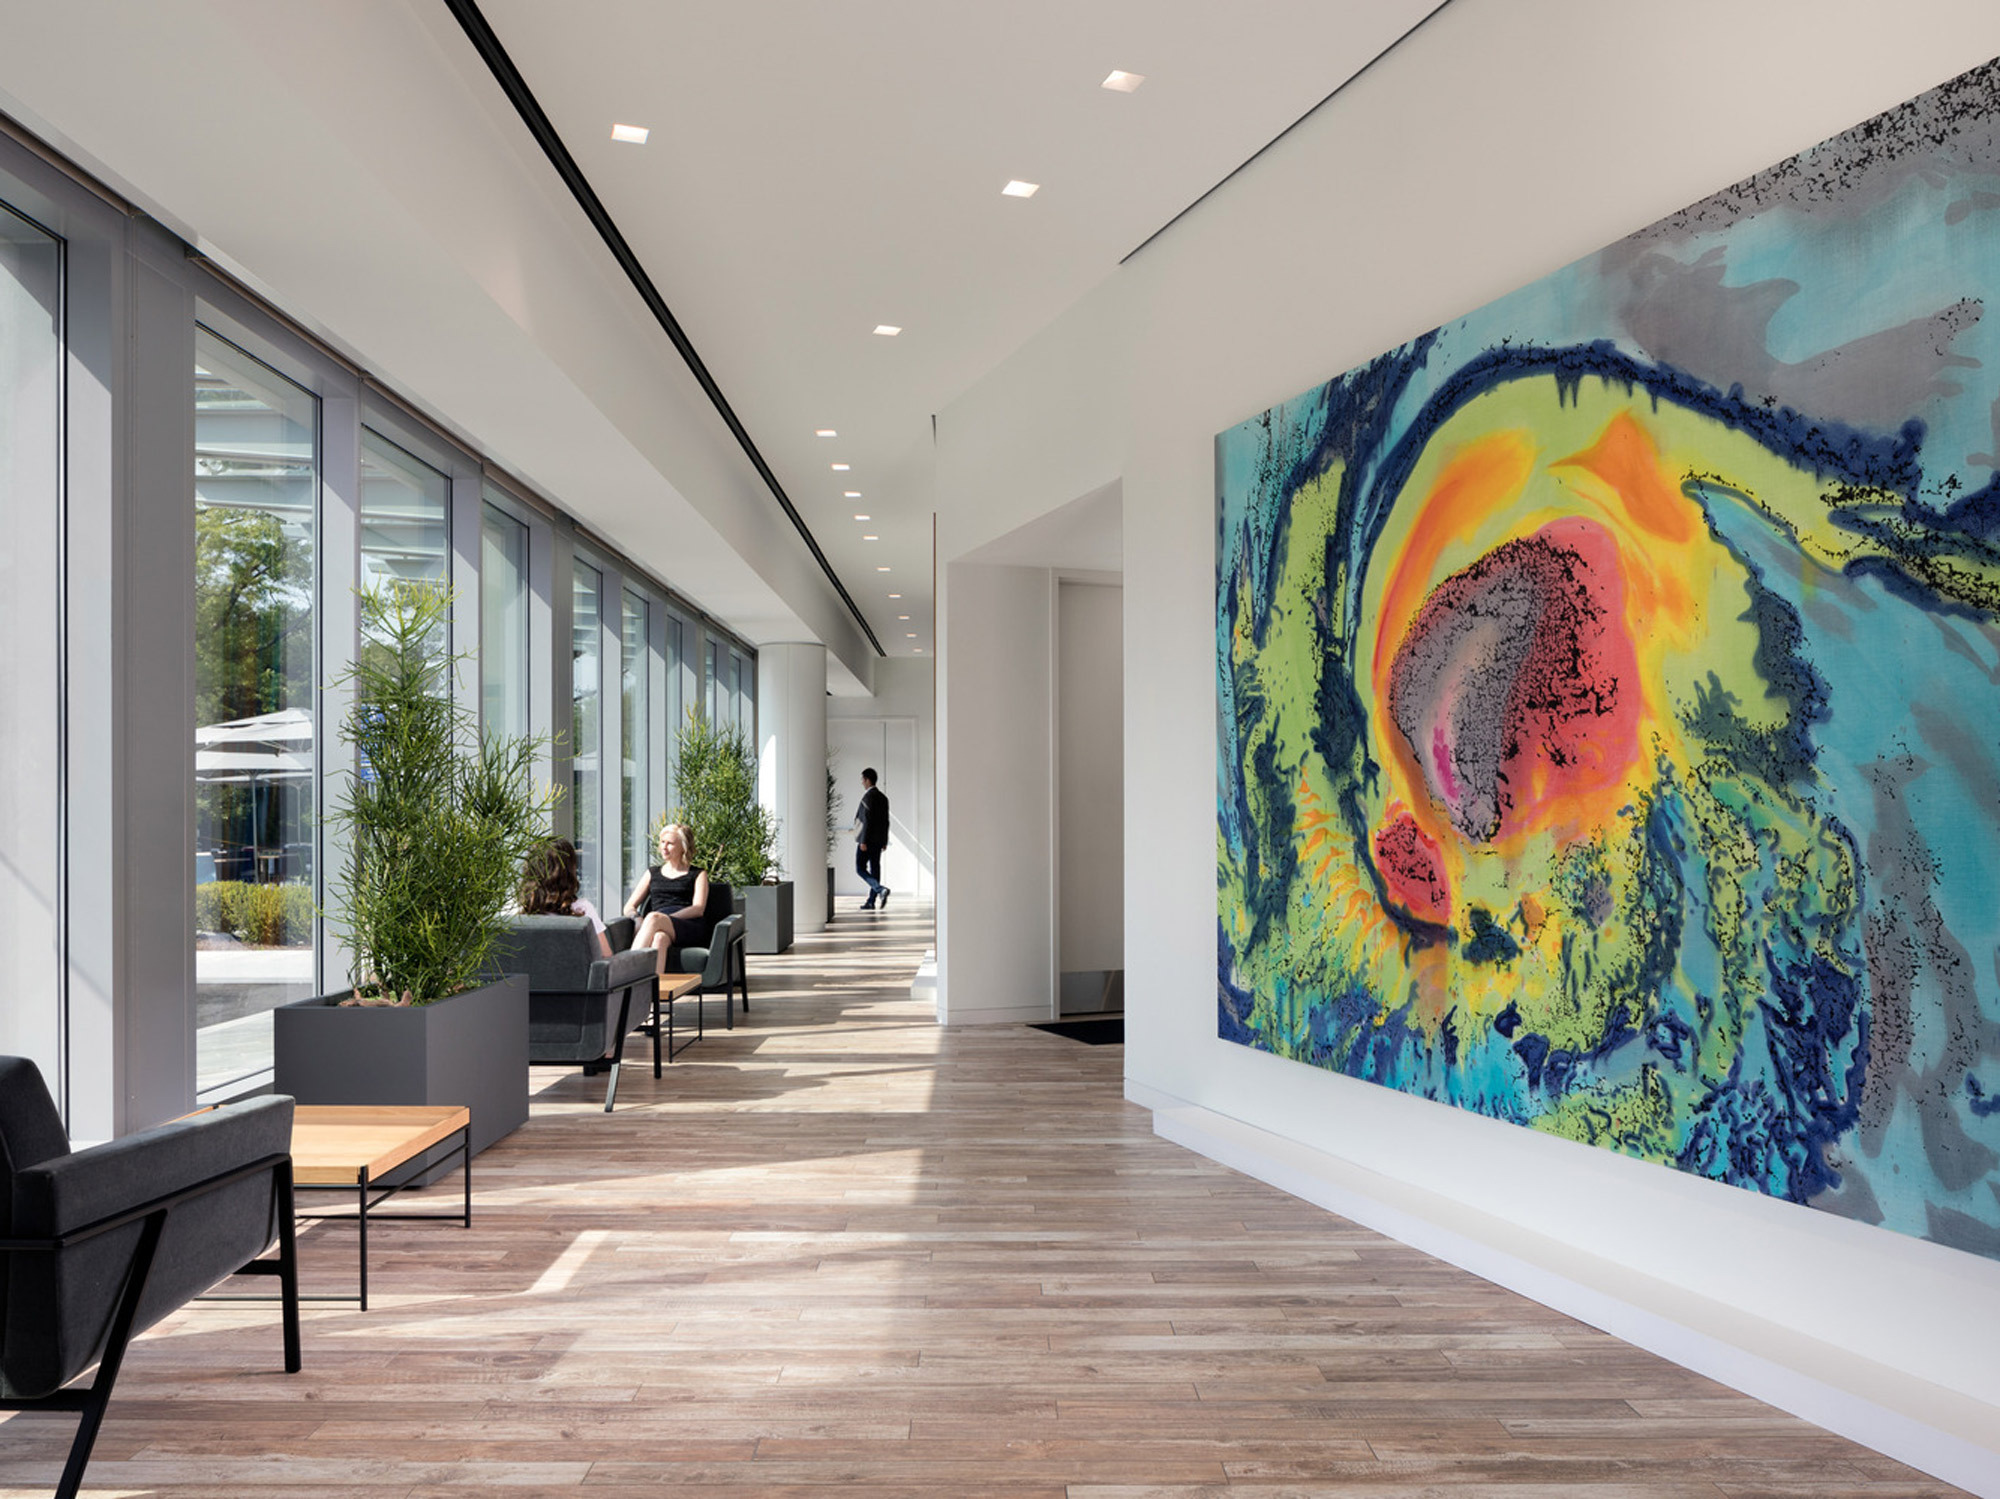 Modern hallway in a corporate building featuring sleek wooden floors, white walls, and expansive windows that infuse the space with natural light. A prominent, colorful abstract painting adds a vibrant focal point, while minimalist furniture provides functional seating areas for brief interactions.